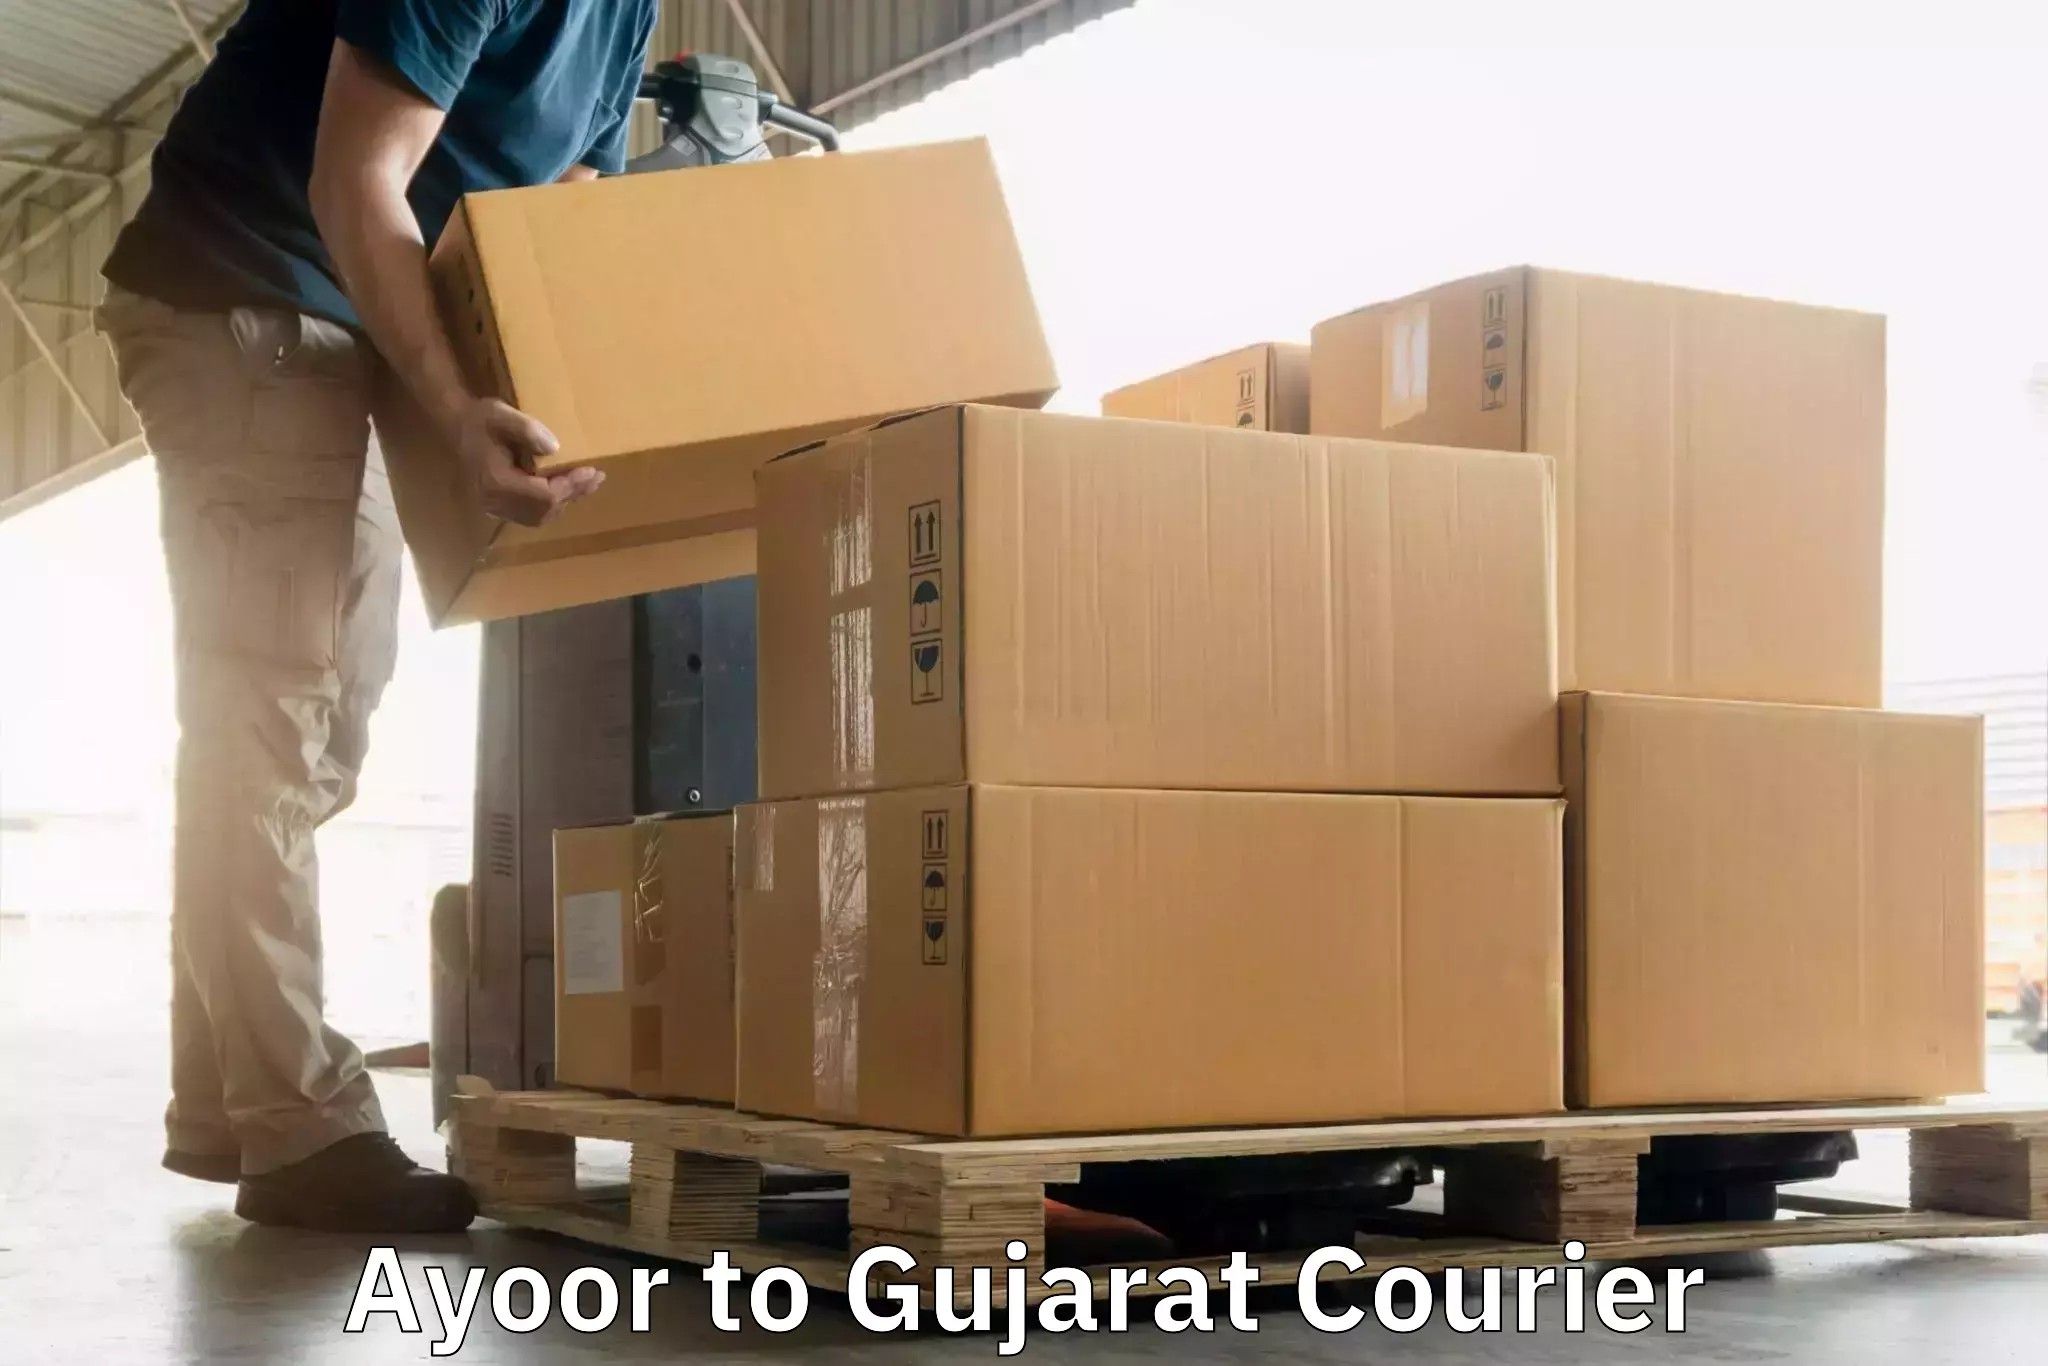 Courier rate comparison Ayoor to Dharmaram